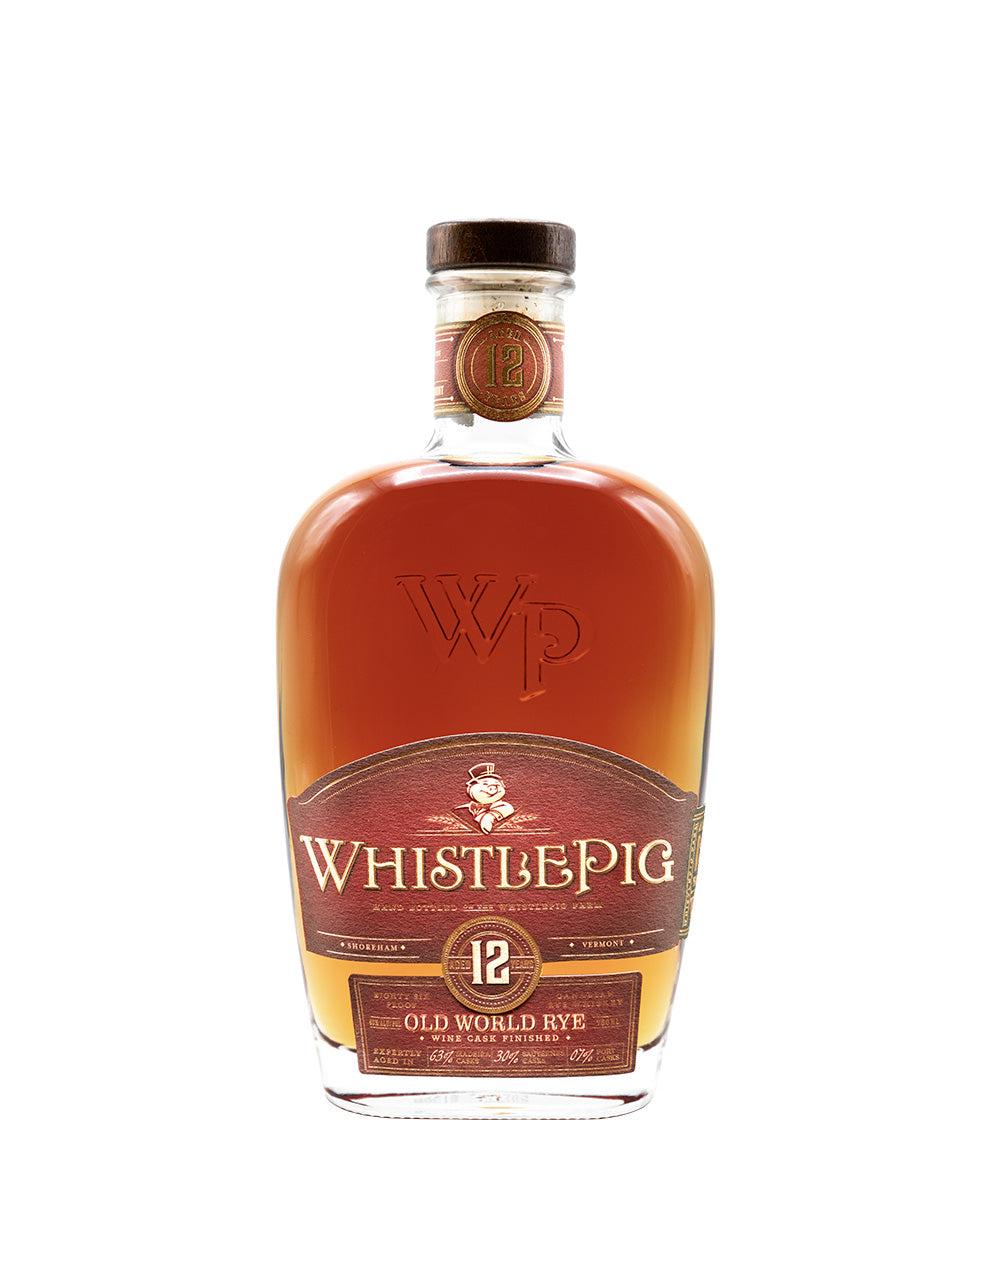 WhistlePig 12 Year Old World Cask Rye Whiskey